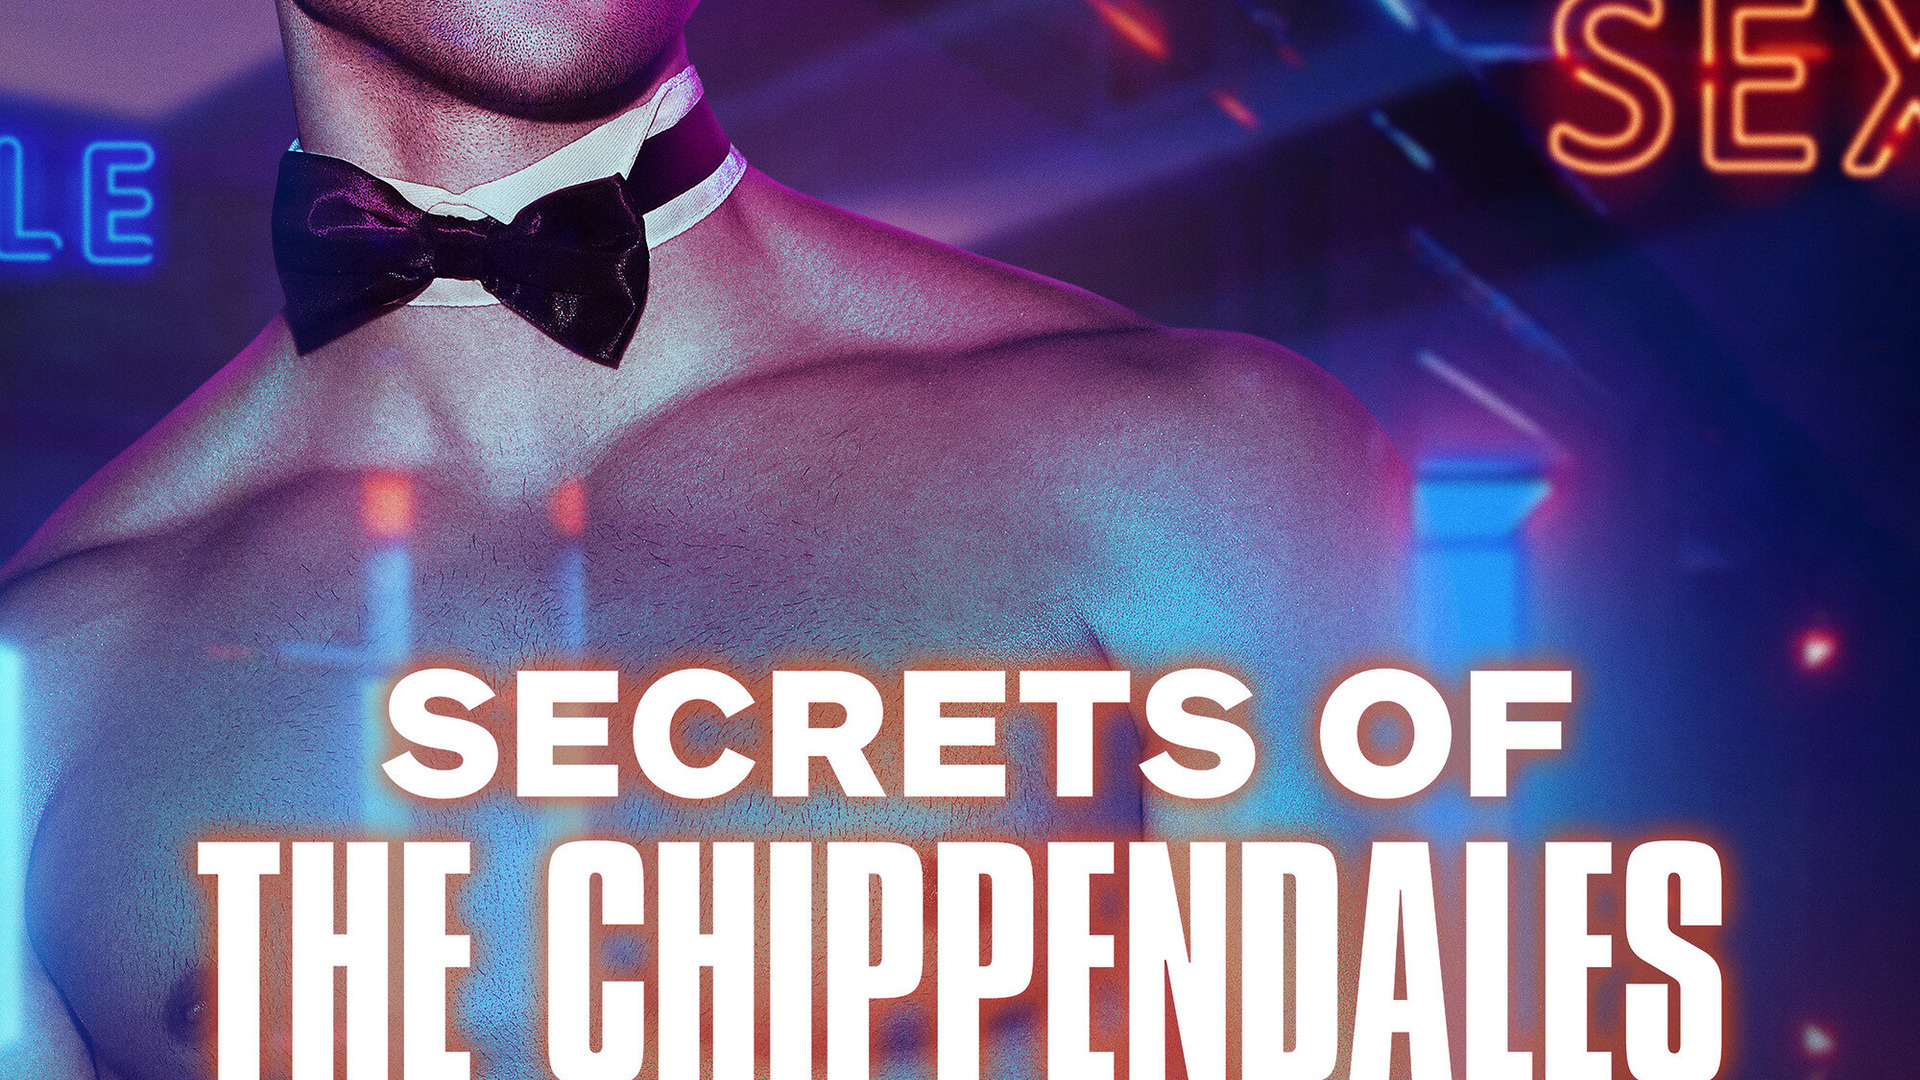 Show Secrets of the Chippendales Murders